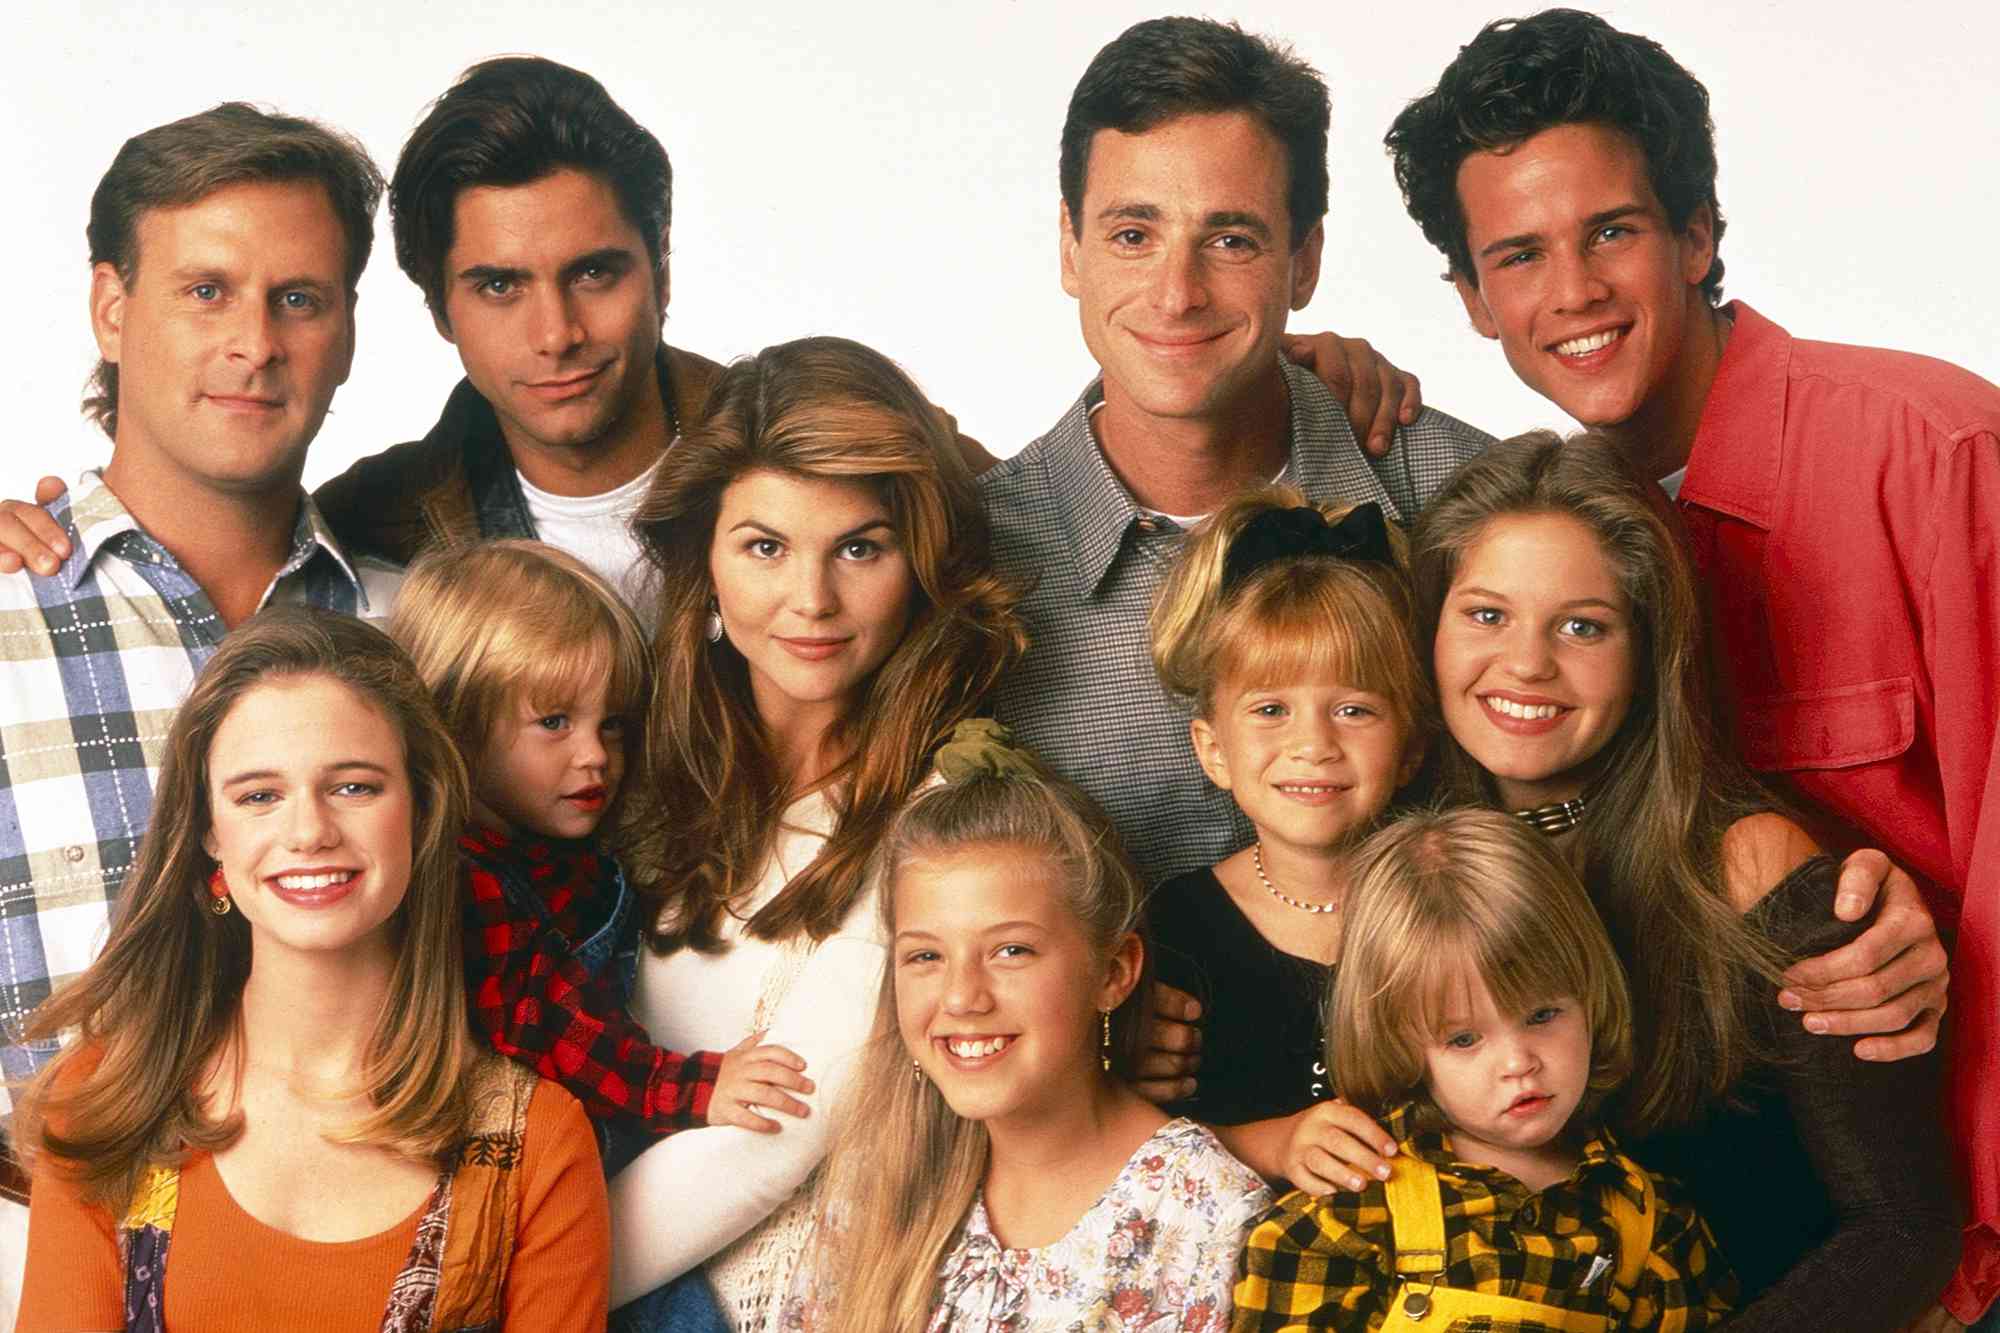 FULL HOUSE, top, from left: Dave Coulier, John Stamos, Bob Saget, Scott Weinger, bottom, from left: Andrea Barber, Blake Tuomy-Wilhoit, Lori Loughlin, Jodie Sweetin, Mary-Kate Olsen, Dylan Tuomy-Wilhoit, Candace Cameron Bure, 1993, 1987-1995.